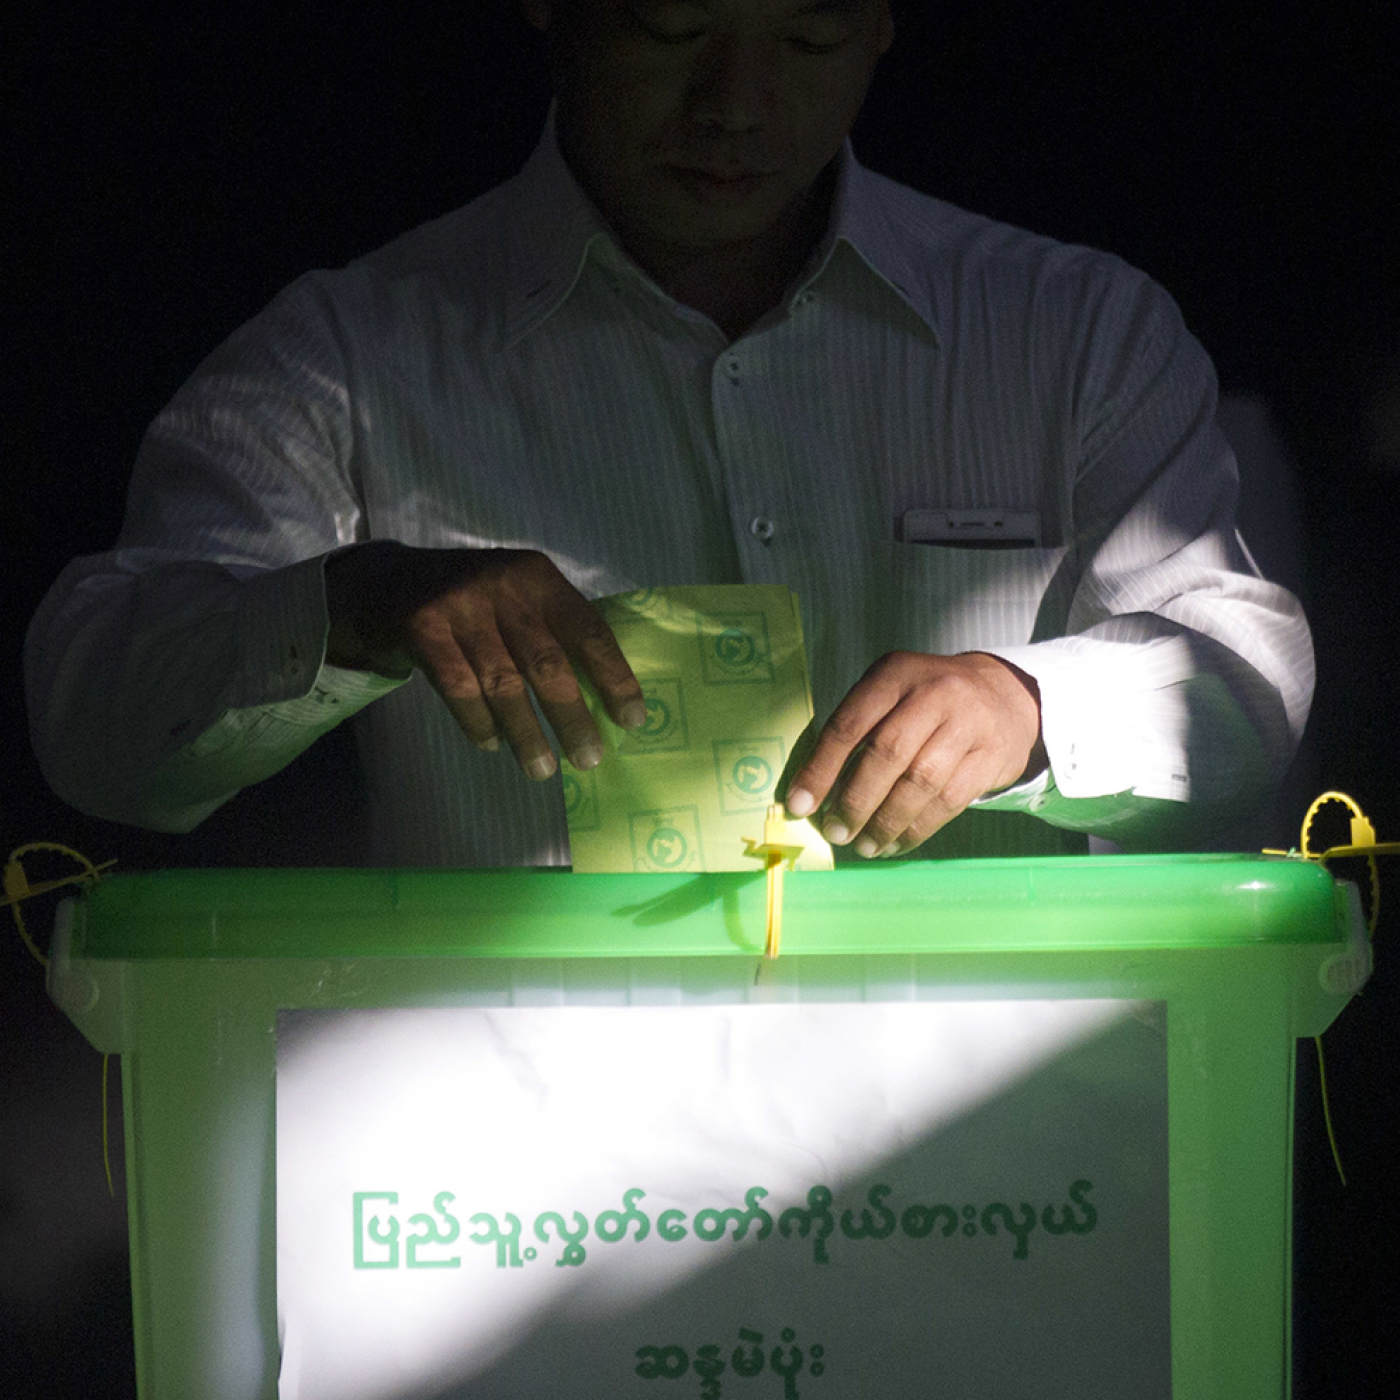 A voter casts his ballot at a polling station in Yangon, Myanmar, during the 2018 by-elections.